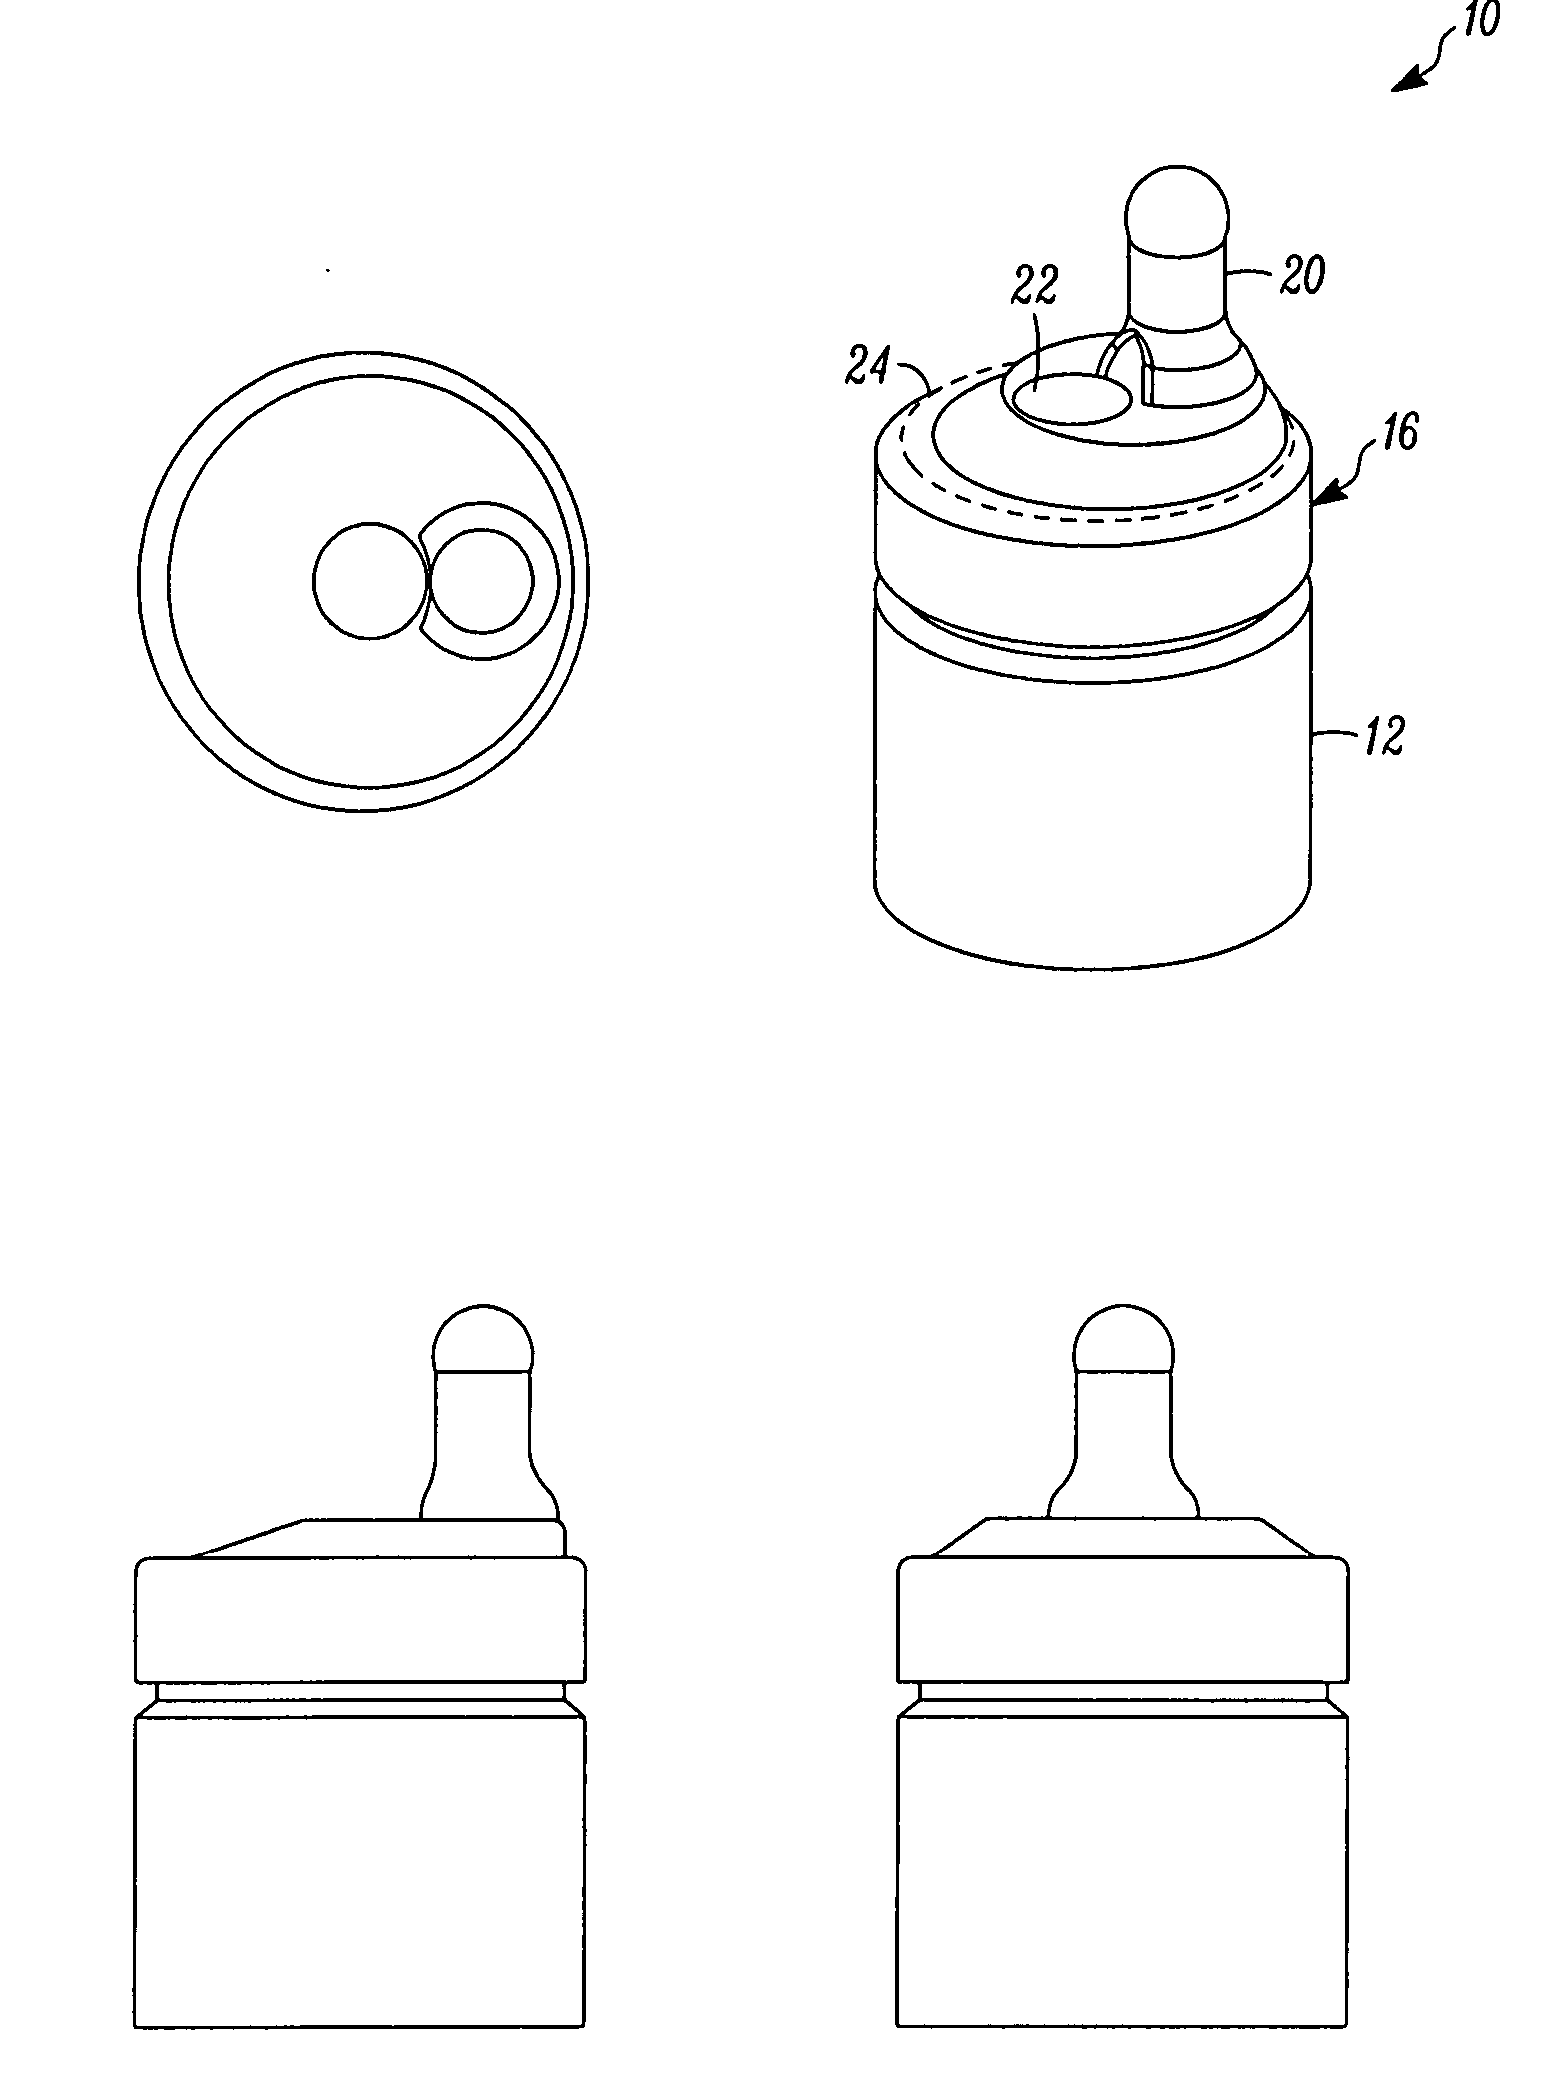 Ready to drink container with nipple and needle penetrable and laser resealable portion, and related method